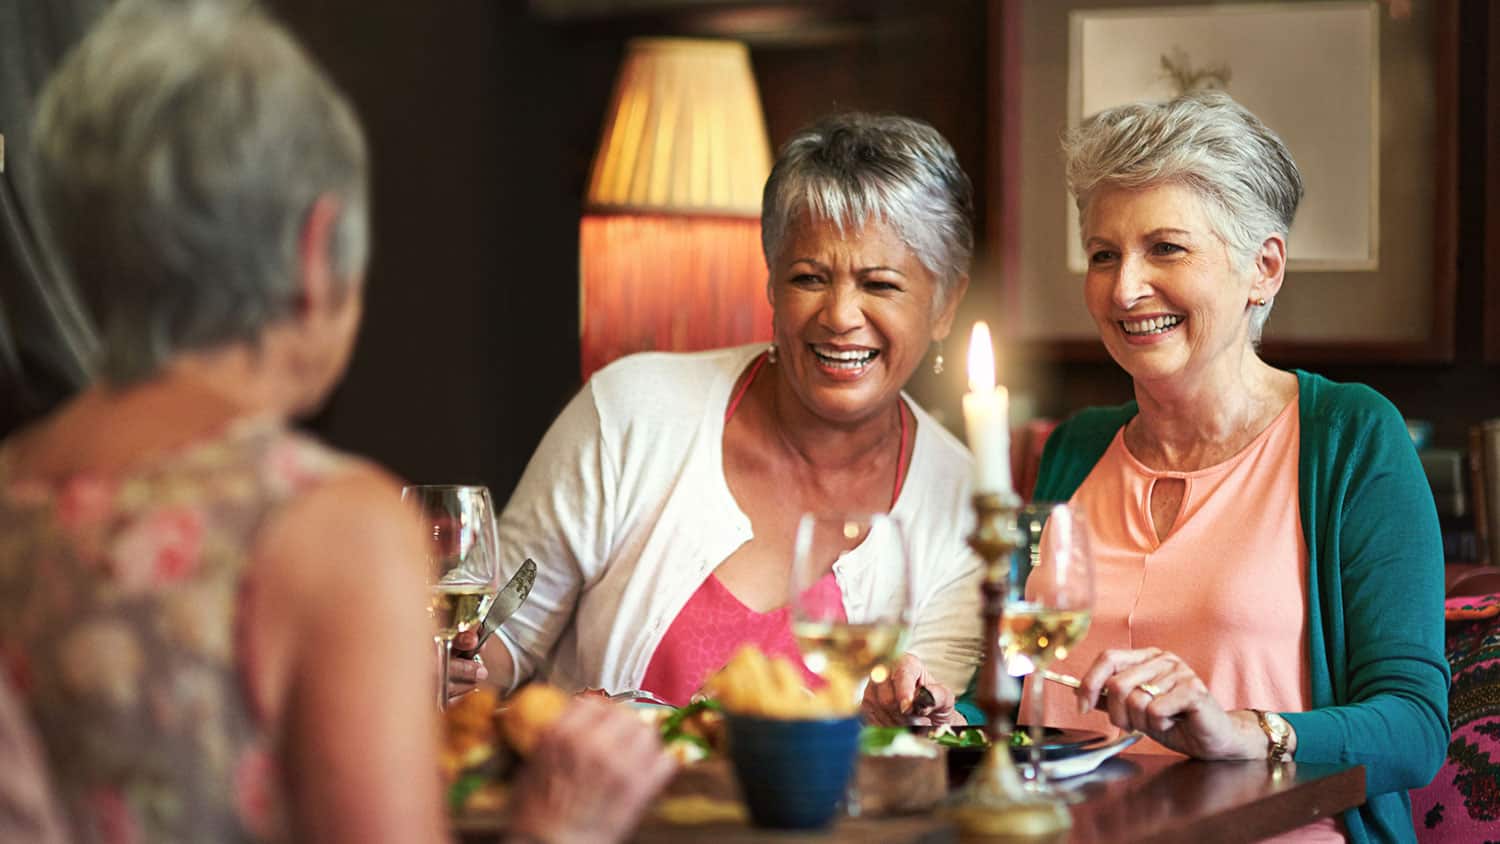 What Do Women Over 60 Want? Exploring Our Dreams, Hobbies and Fears